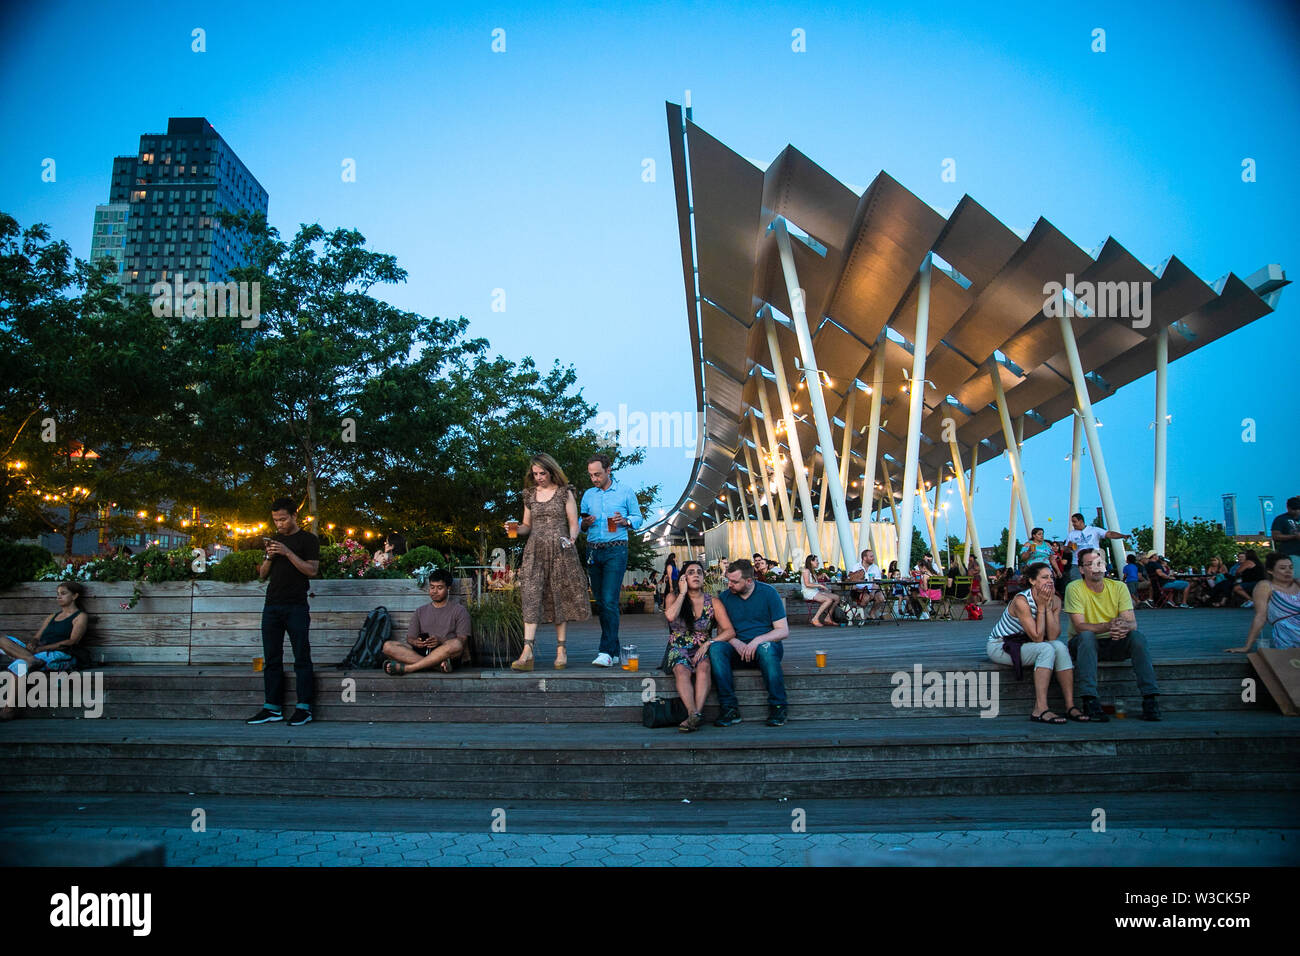 LONG ISLAND CITY, NEW YORK - JULY 13, 2019:  View at Gantry Plaza State Park on a summer evening with people visible. Stock Photo